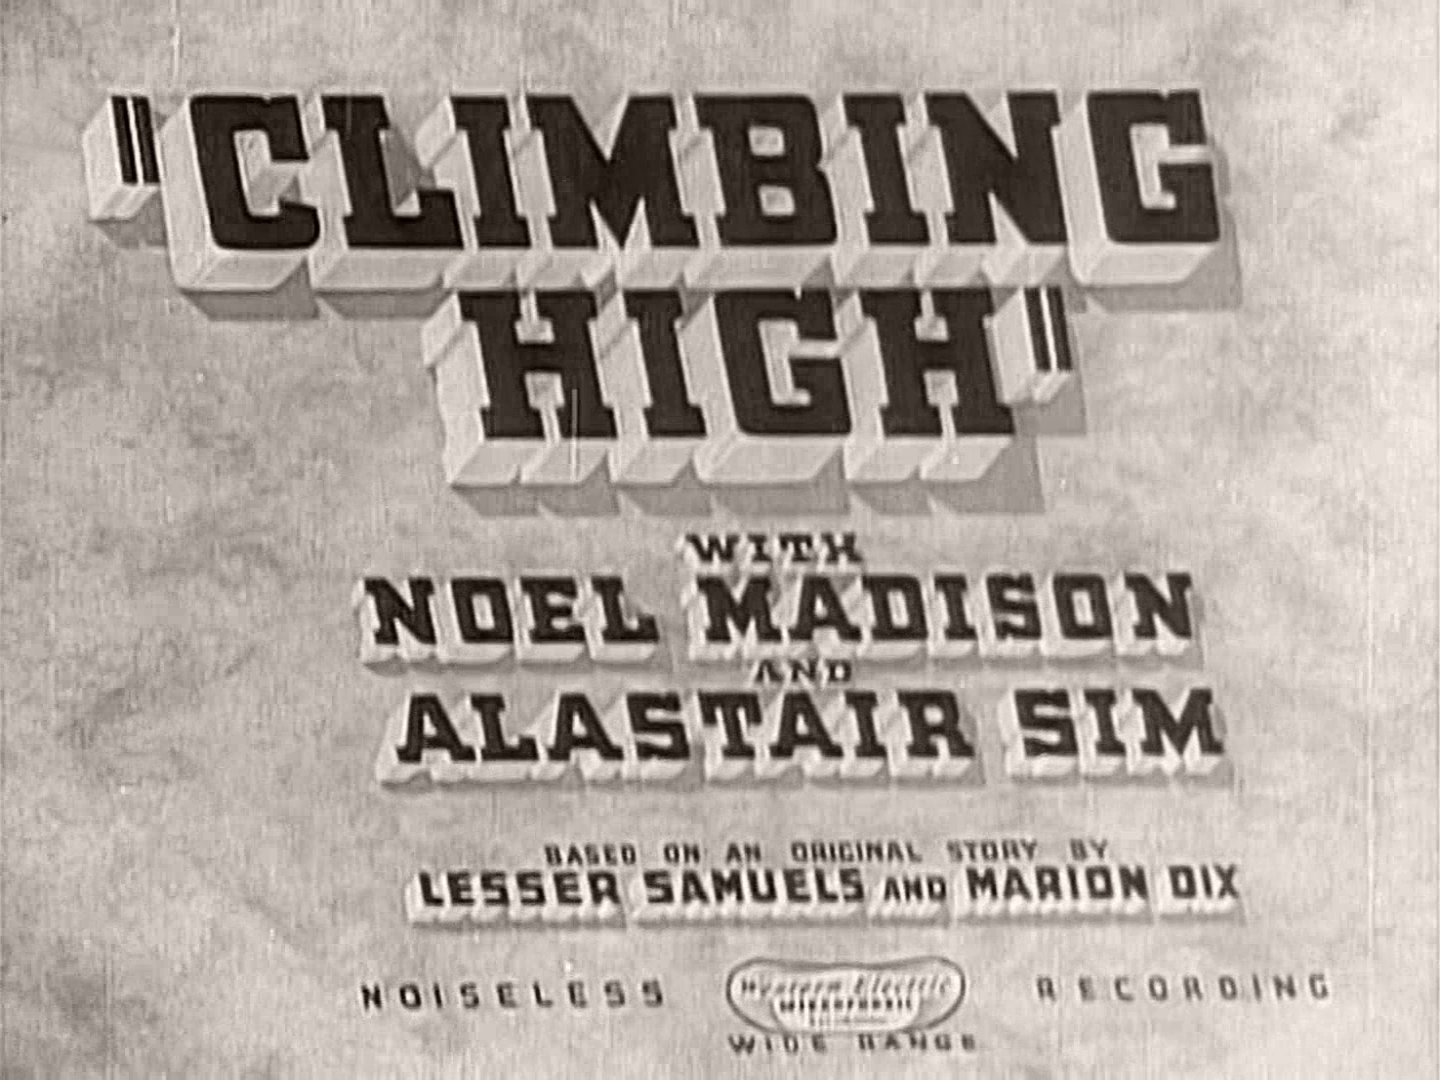 Main title from Climbing High (1938) (3)  With Noel Madison and Alastair Sim  Based on an original story by Lesser Samuels and Marion Dix  Noiseless wide range recording  Western Electric